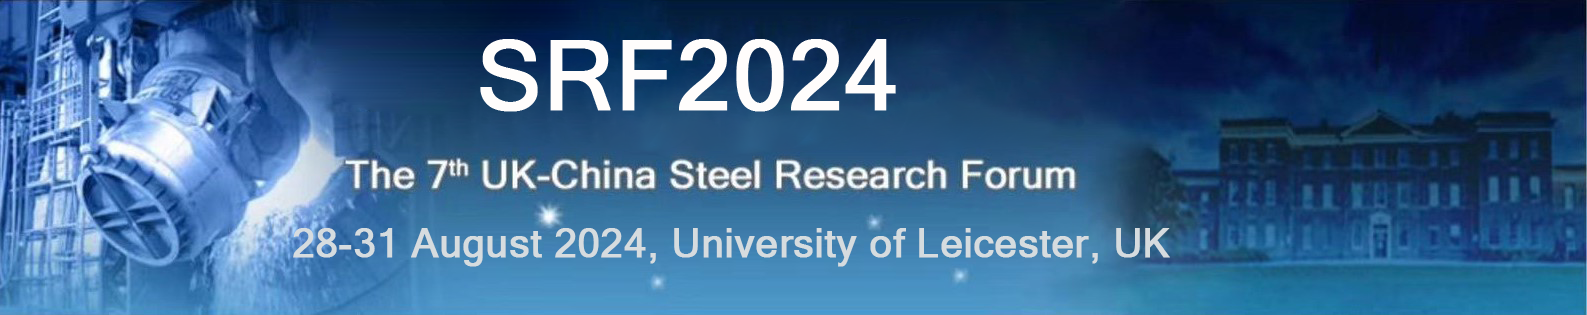 7th UK-China Steel Research Forum